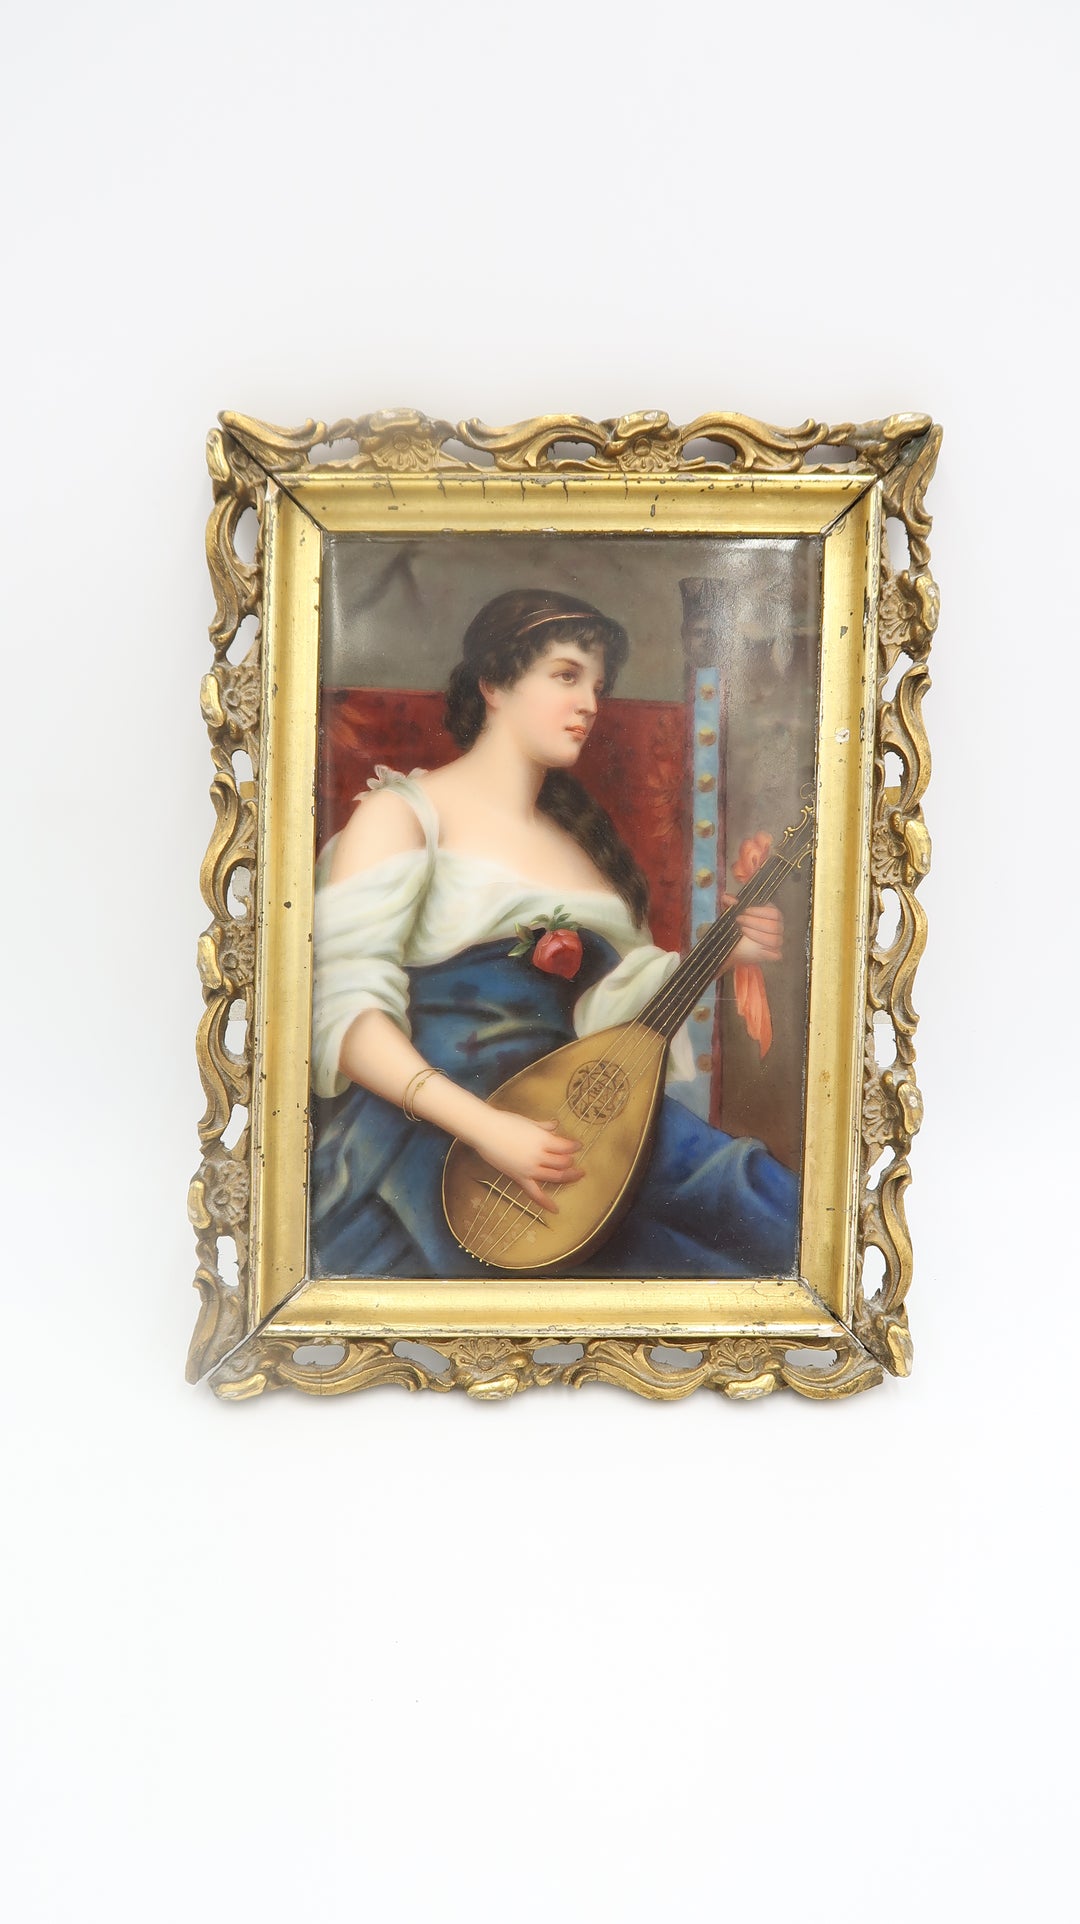 t556 Antique Early 20th Century German Porcelain Plaque Painting, Framed